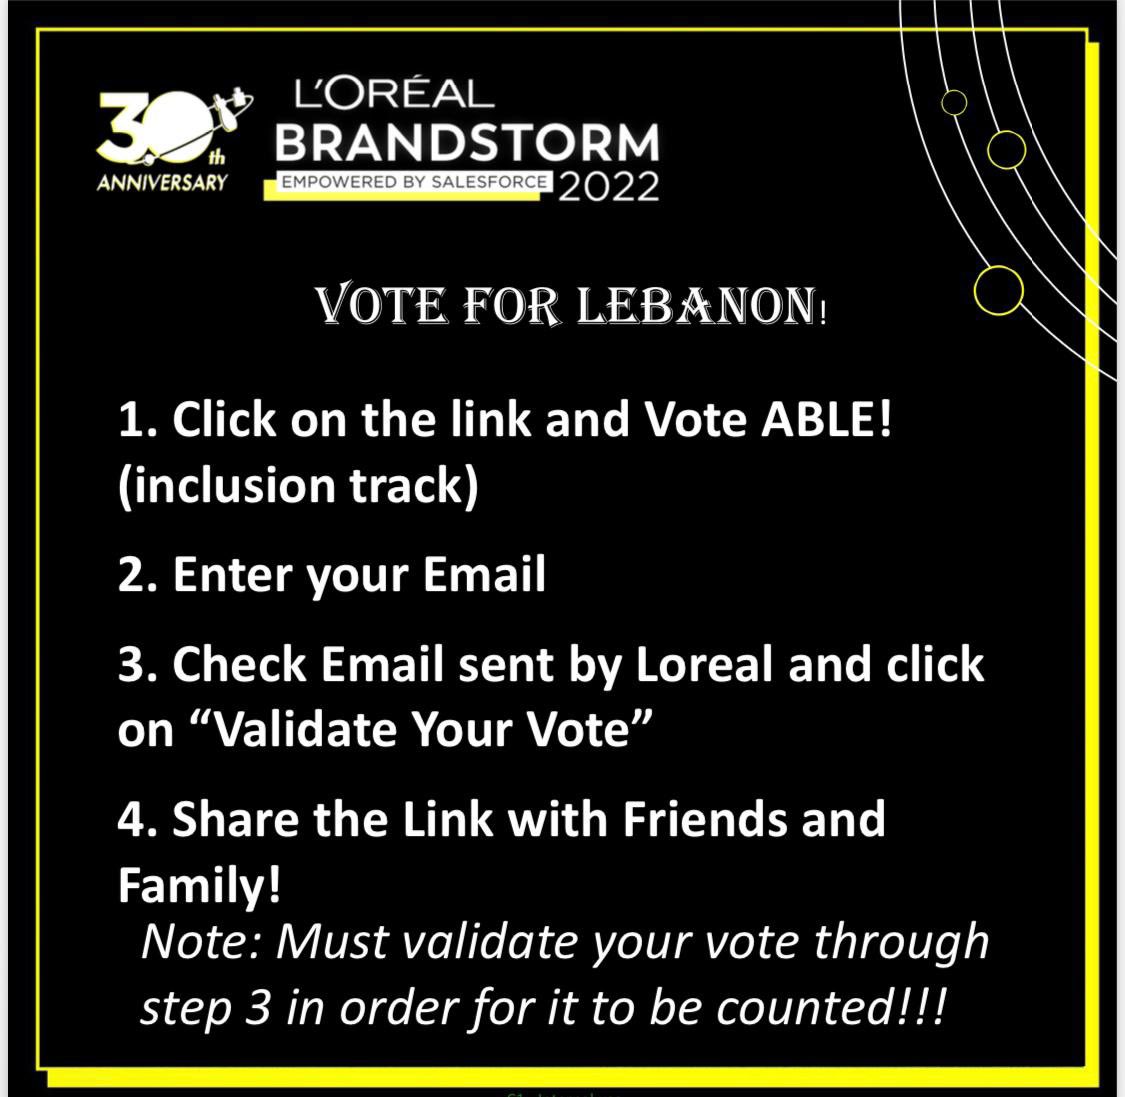 Last voting day for #Brandstorm2022 !!!

Vote ABLE! 

@LOrealGroupe @LOrealCommitted @lorealparisfr @AUB_Lebanon 
brandstorm2022.loreal.com/social/project…